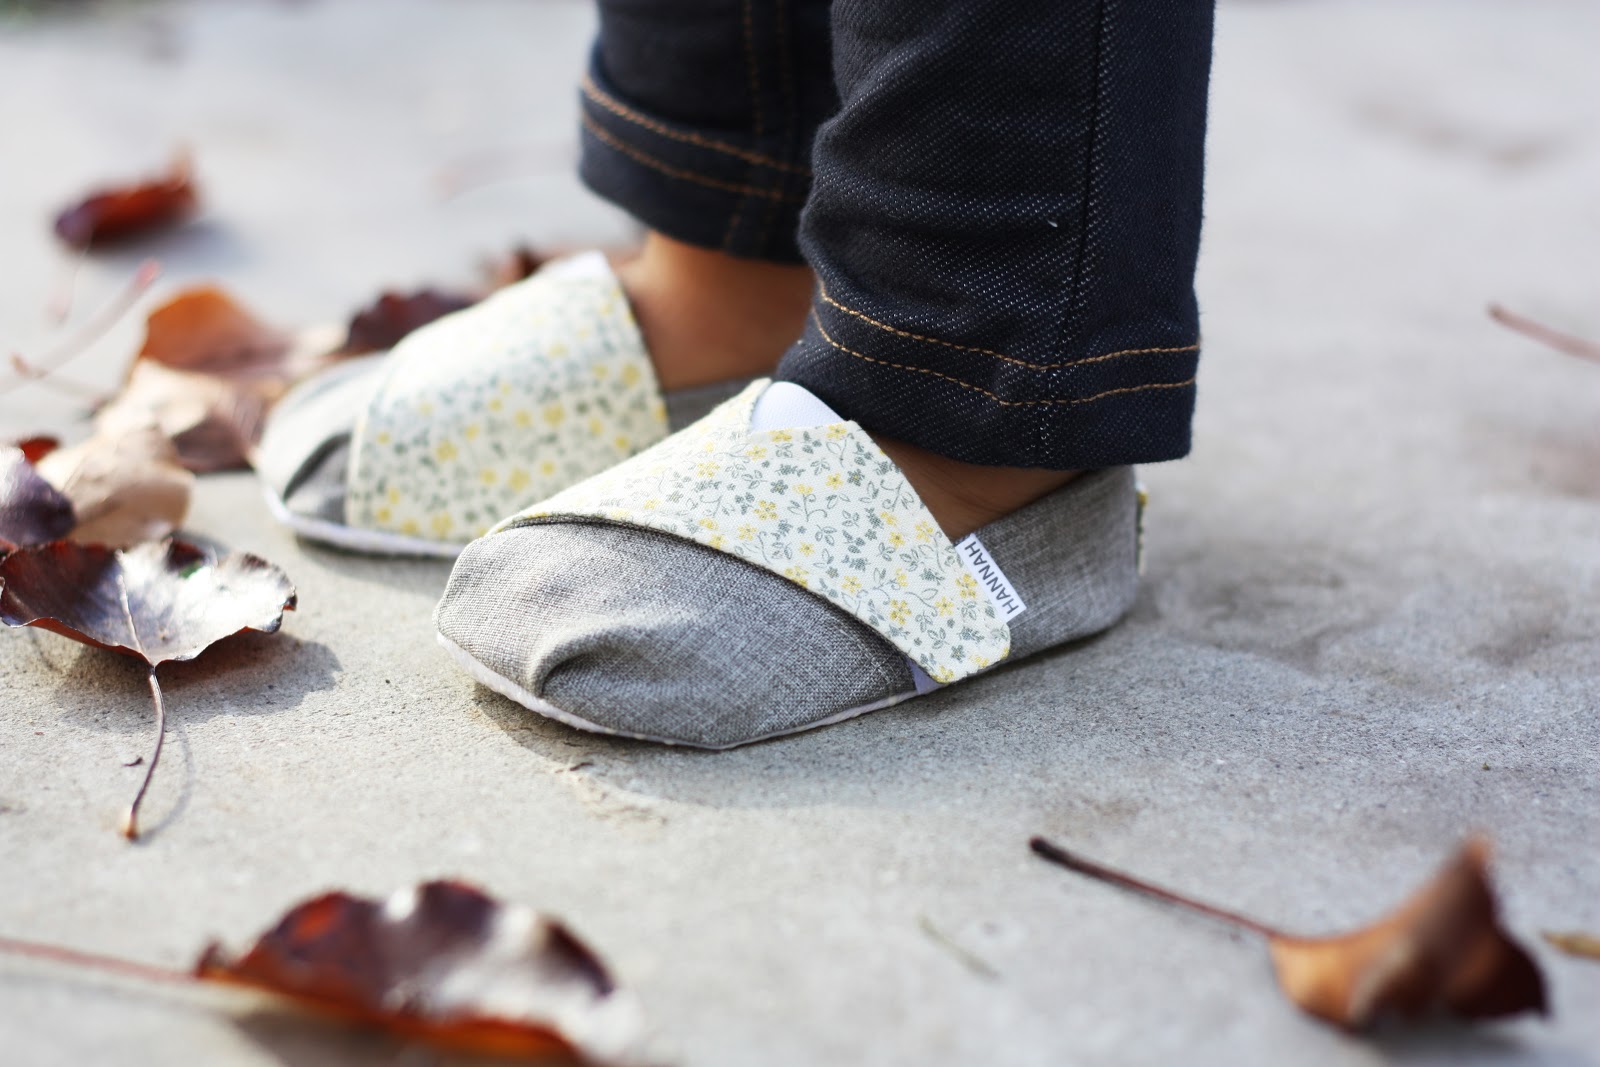 toms baby girl shoes